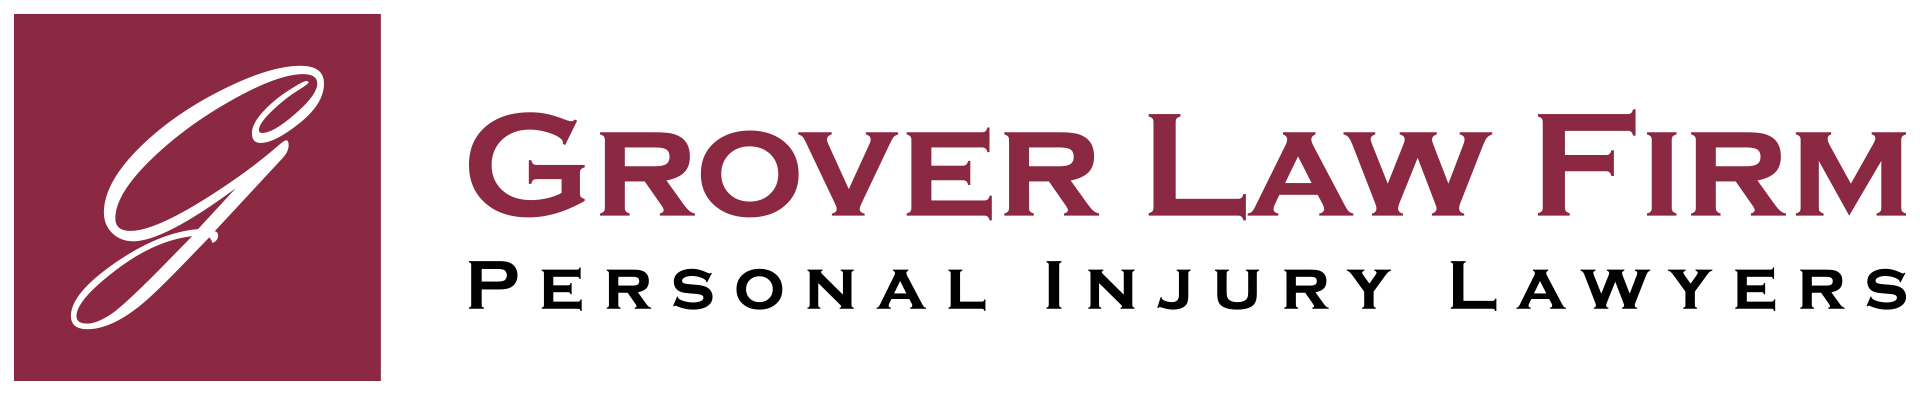 Grover Law Firm Logo